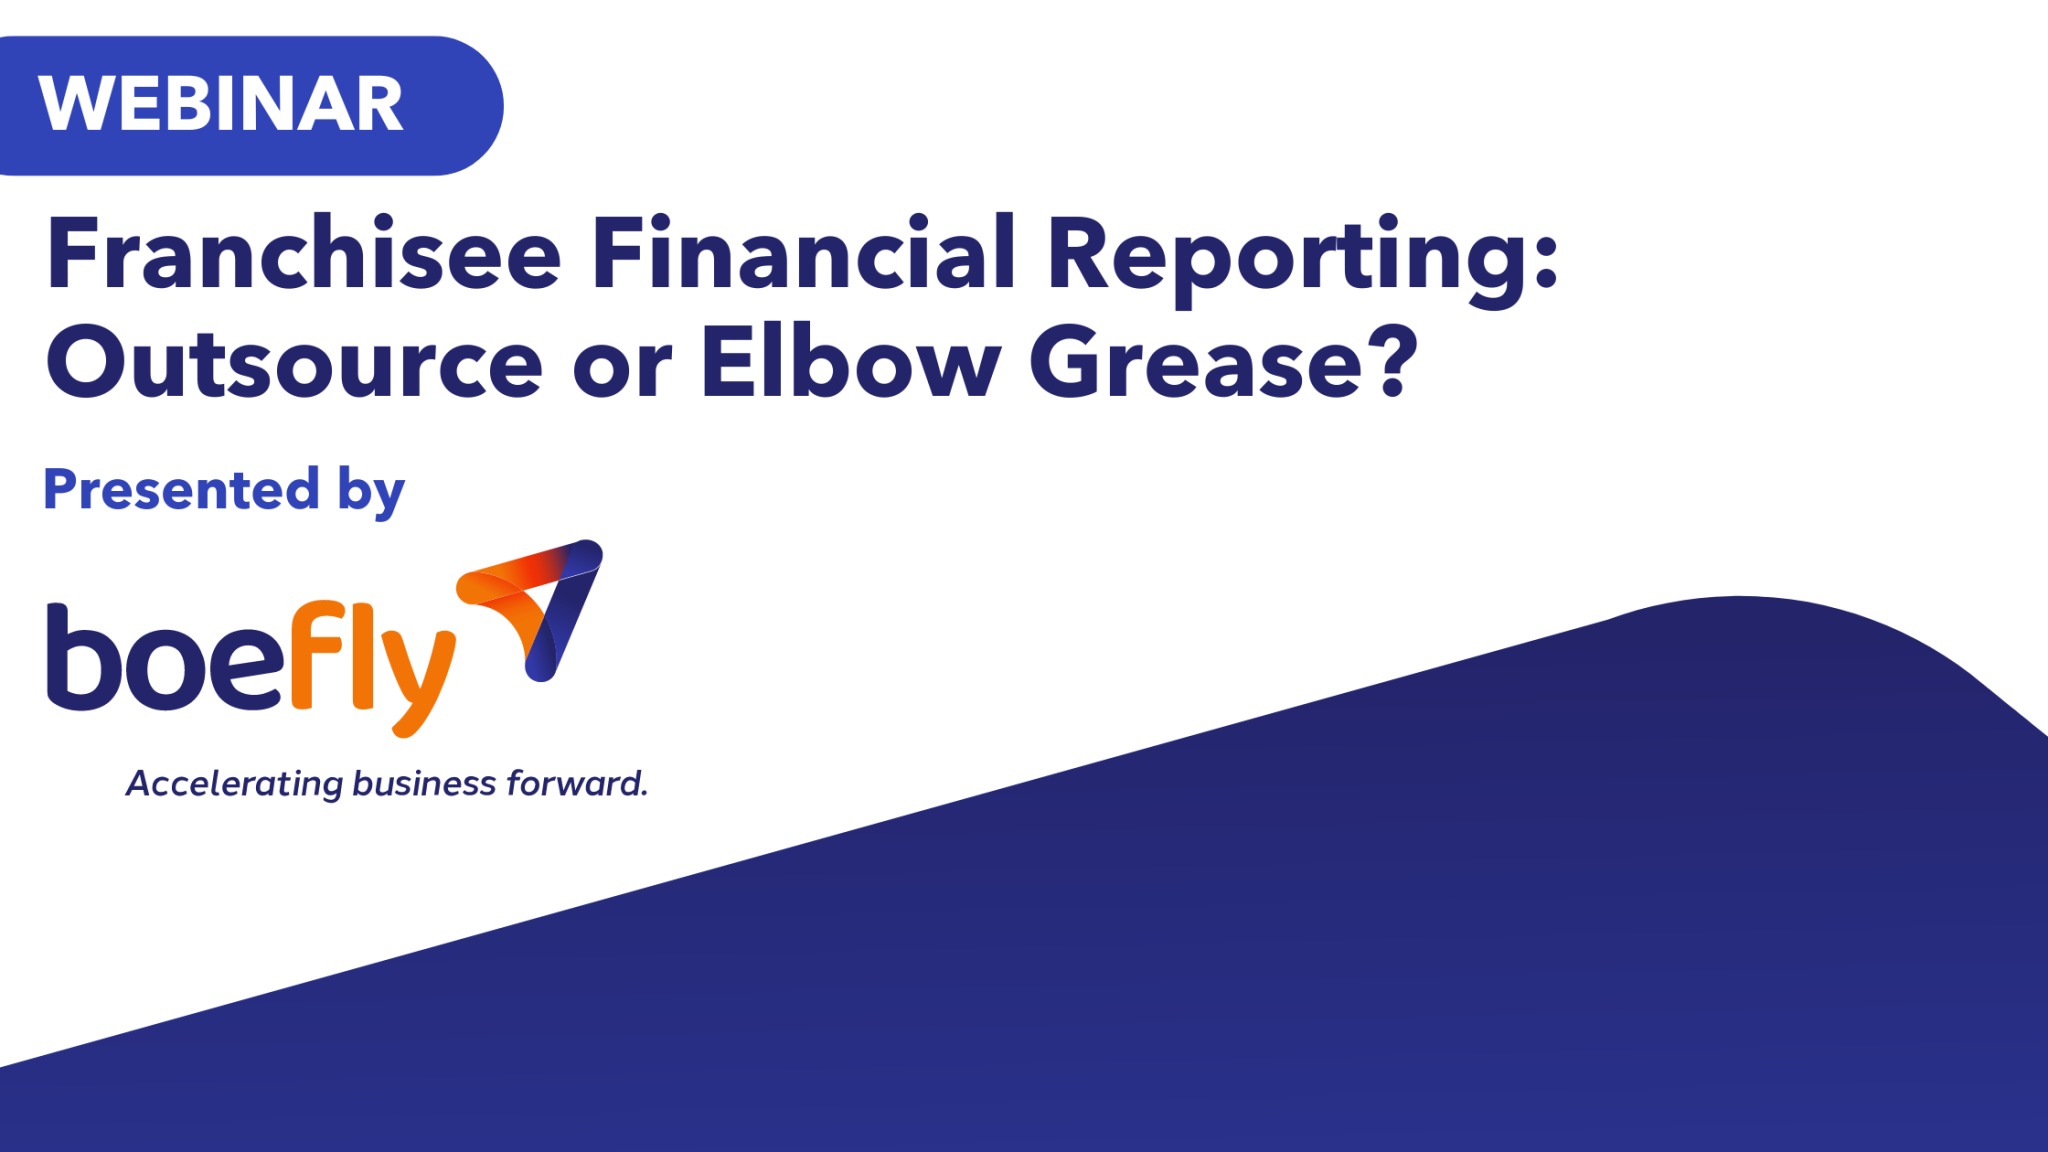 Franchise Financial Reporting - Outsource or Elbow Grease? Webinar Presented by BoeFly